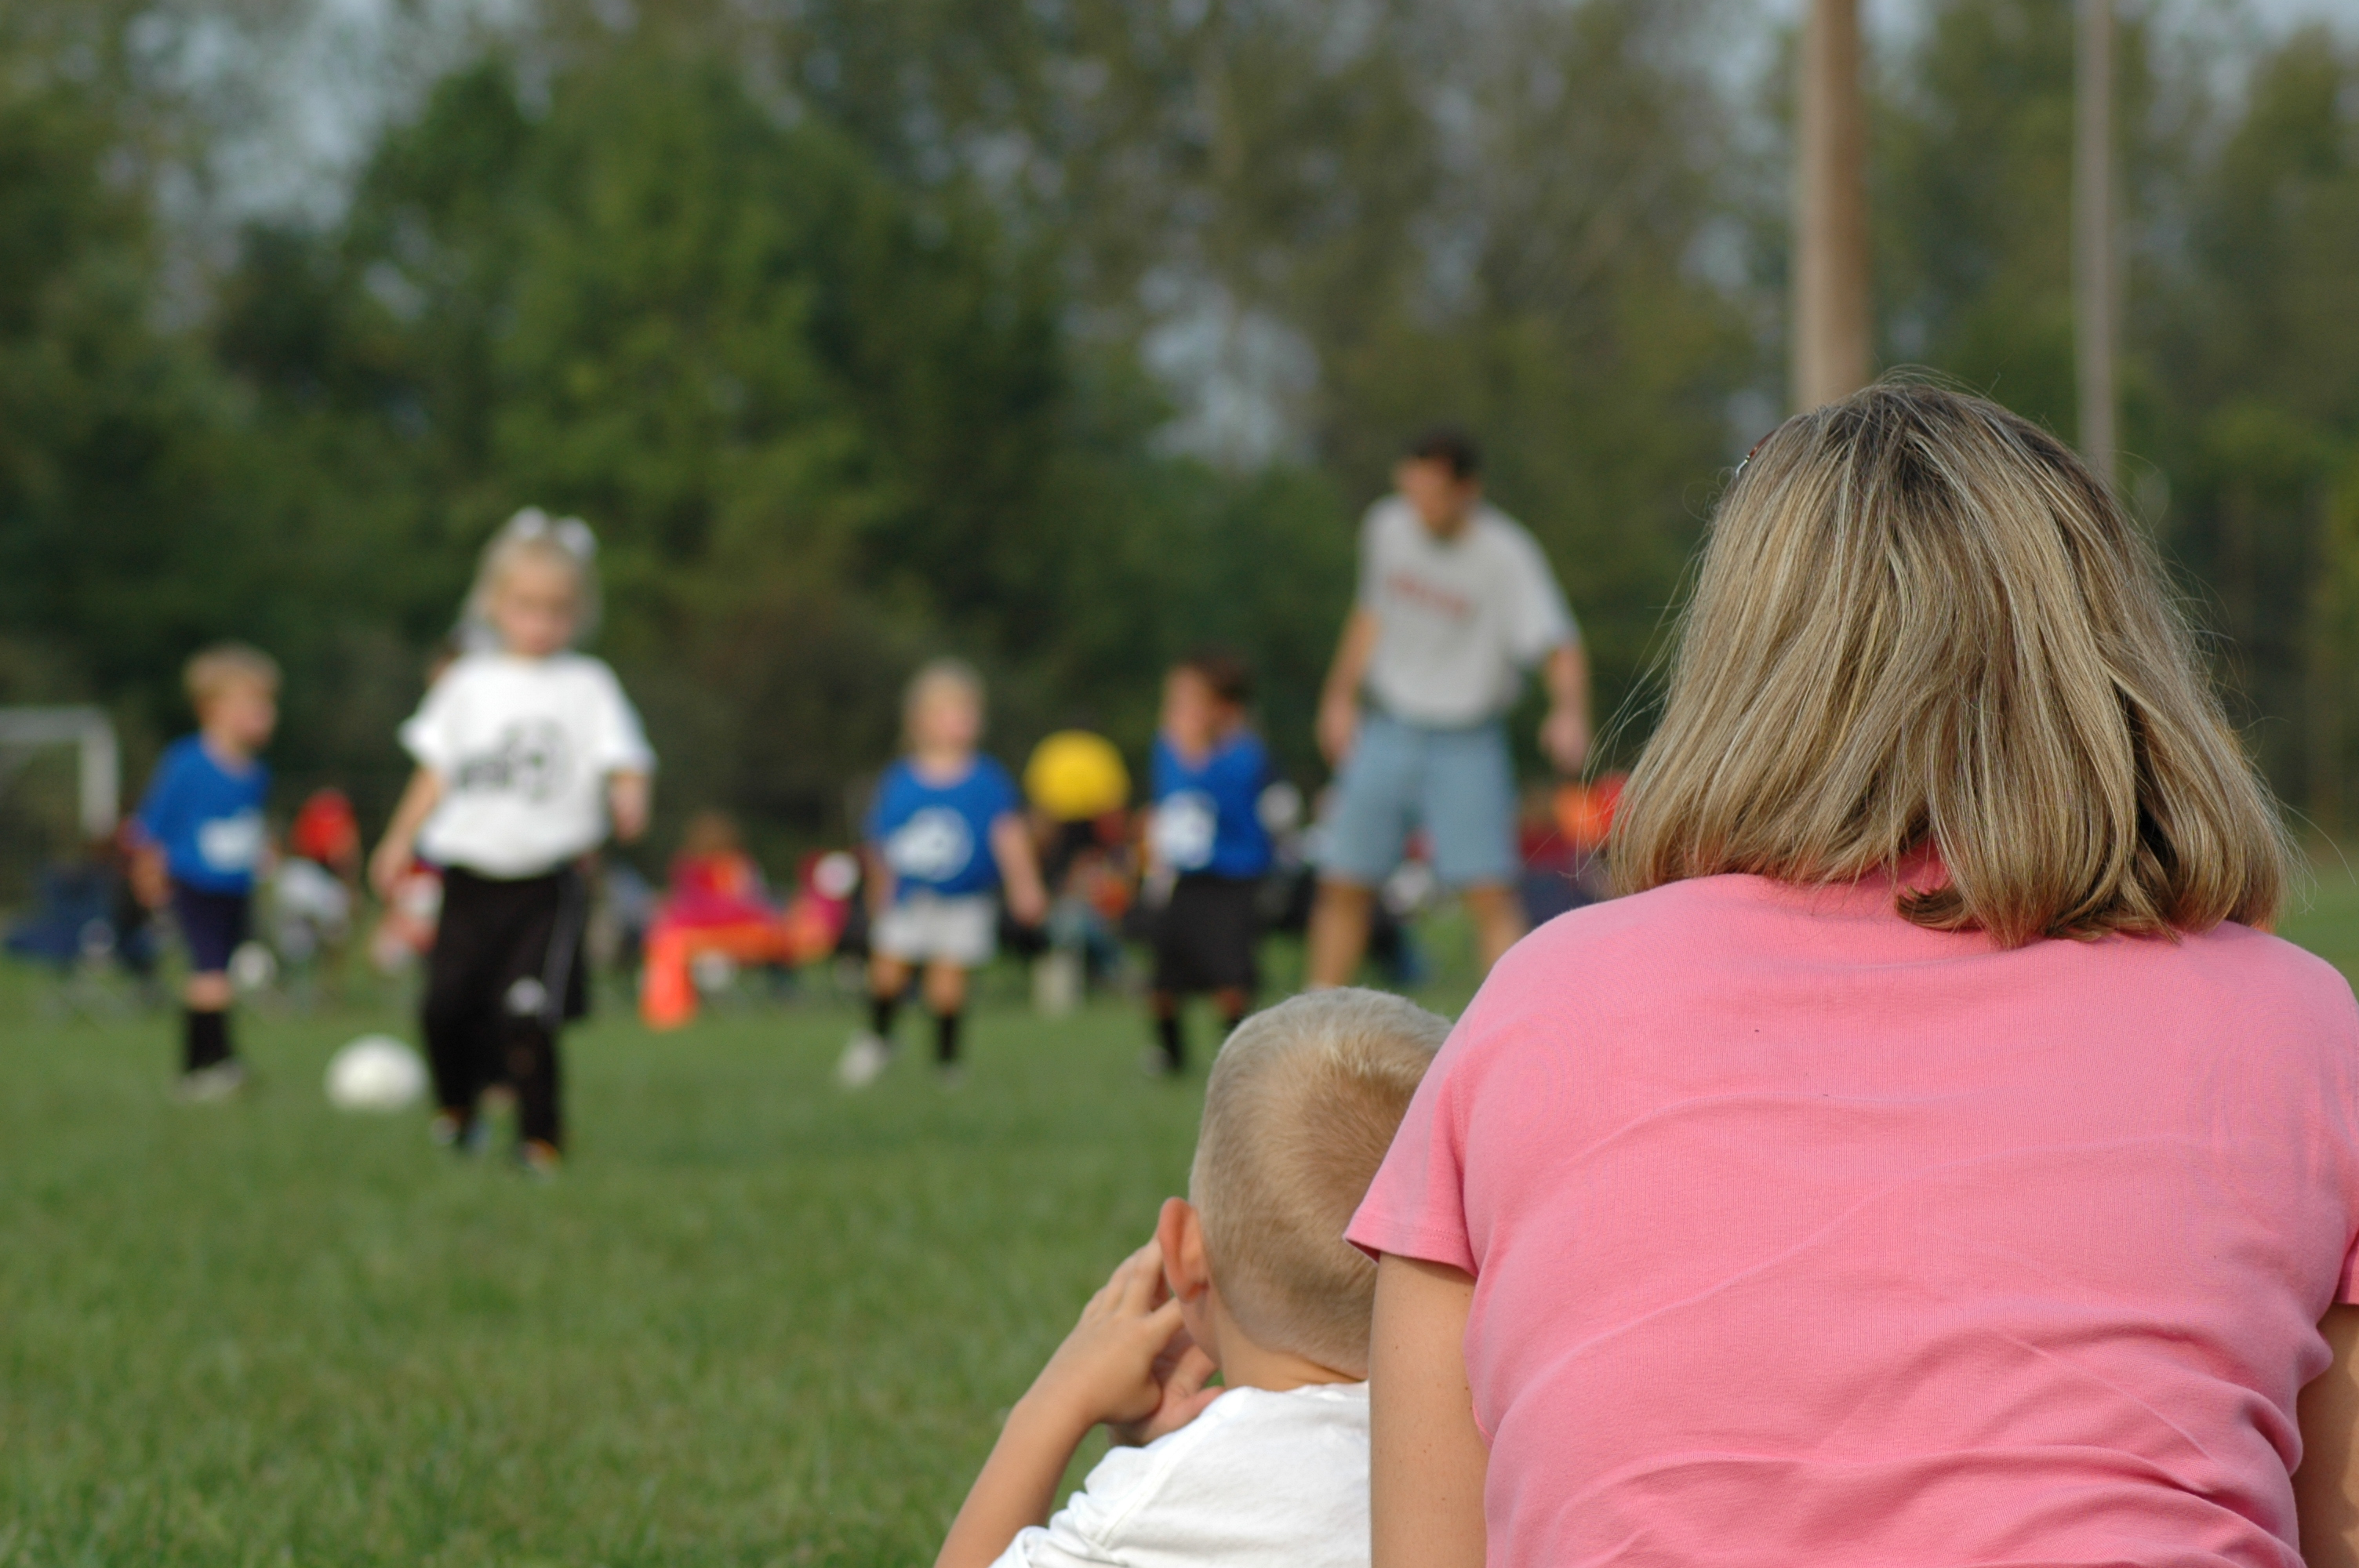 Parent and child watching kids play soccer on a field